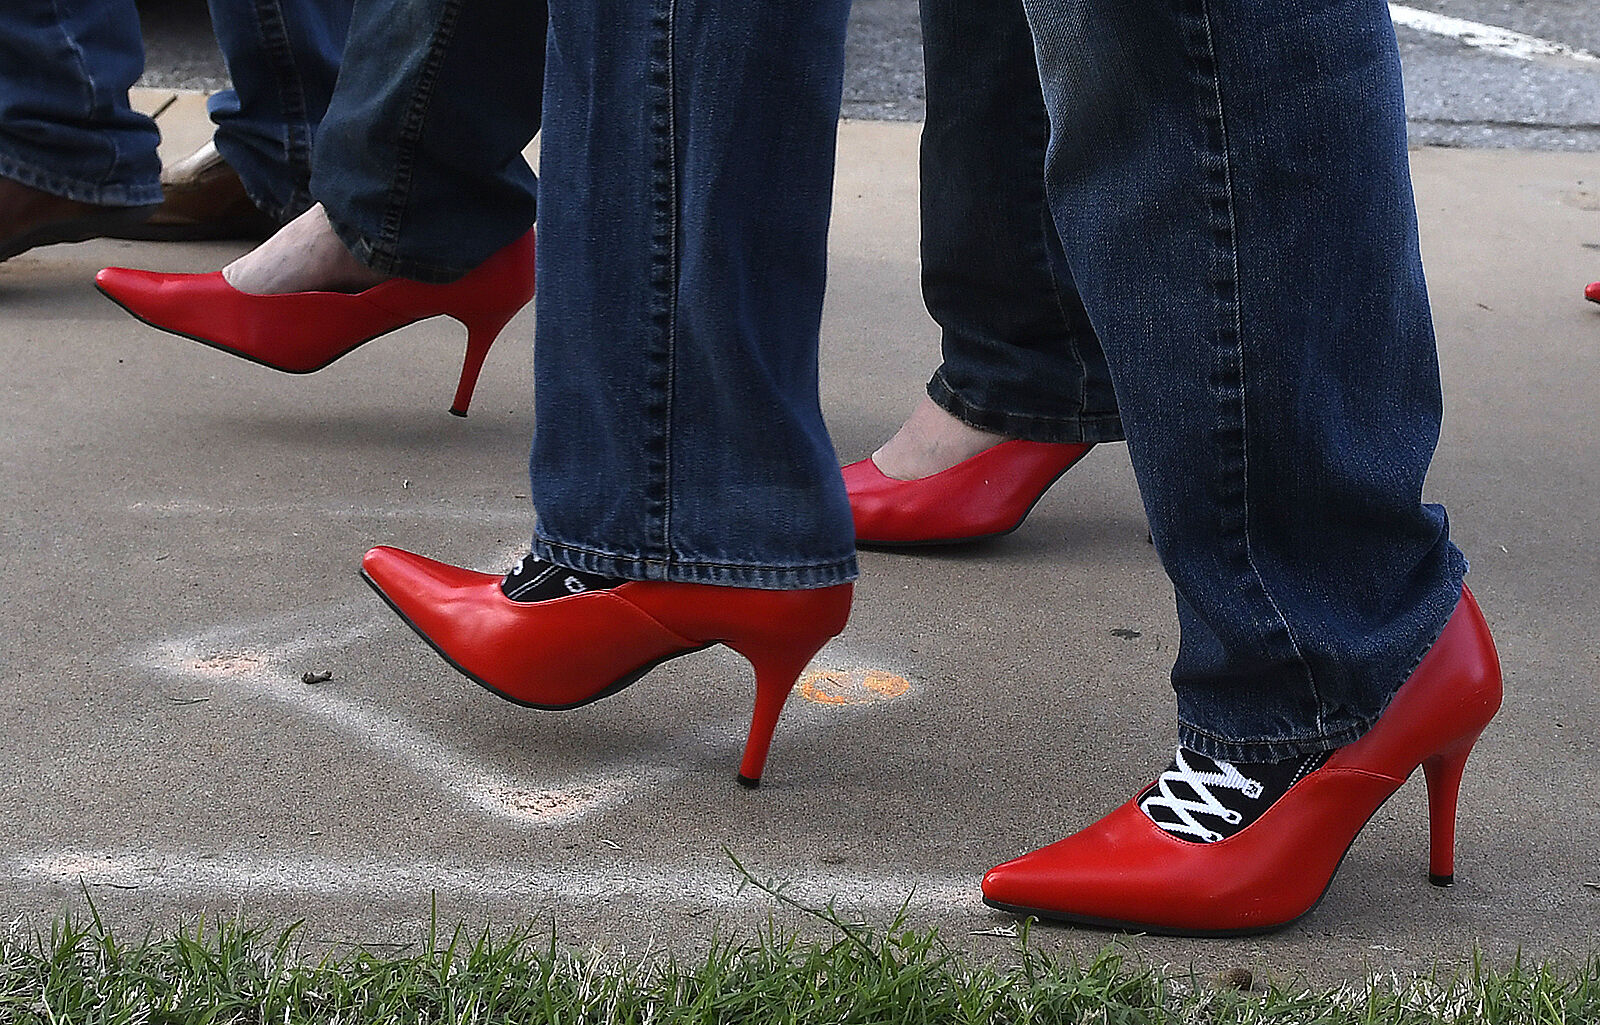 Can a man wear high heels and get away with it while wearing a suit or tux?  - Quora